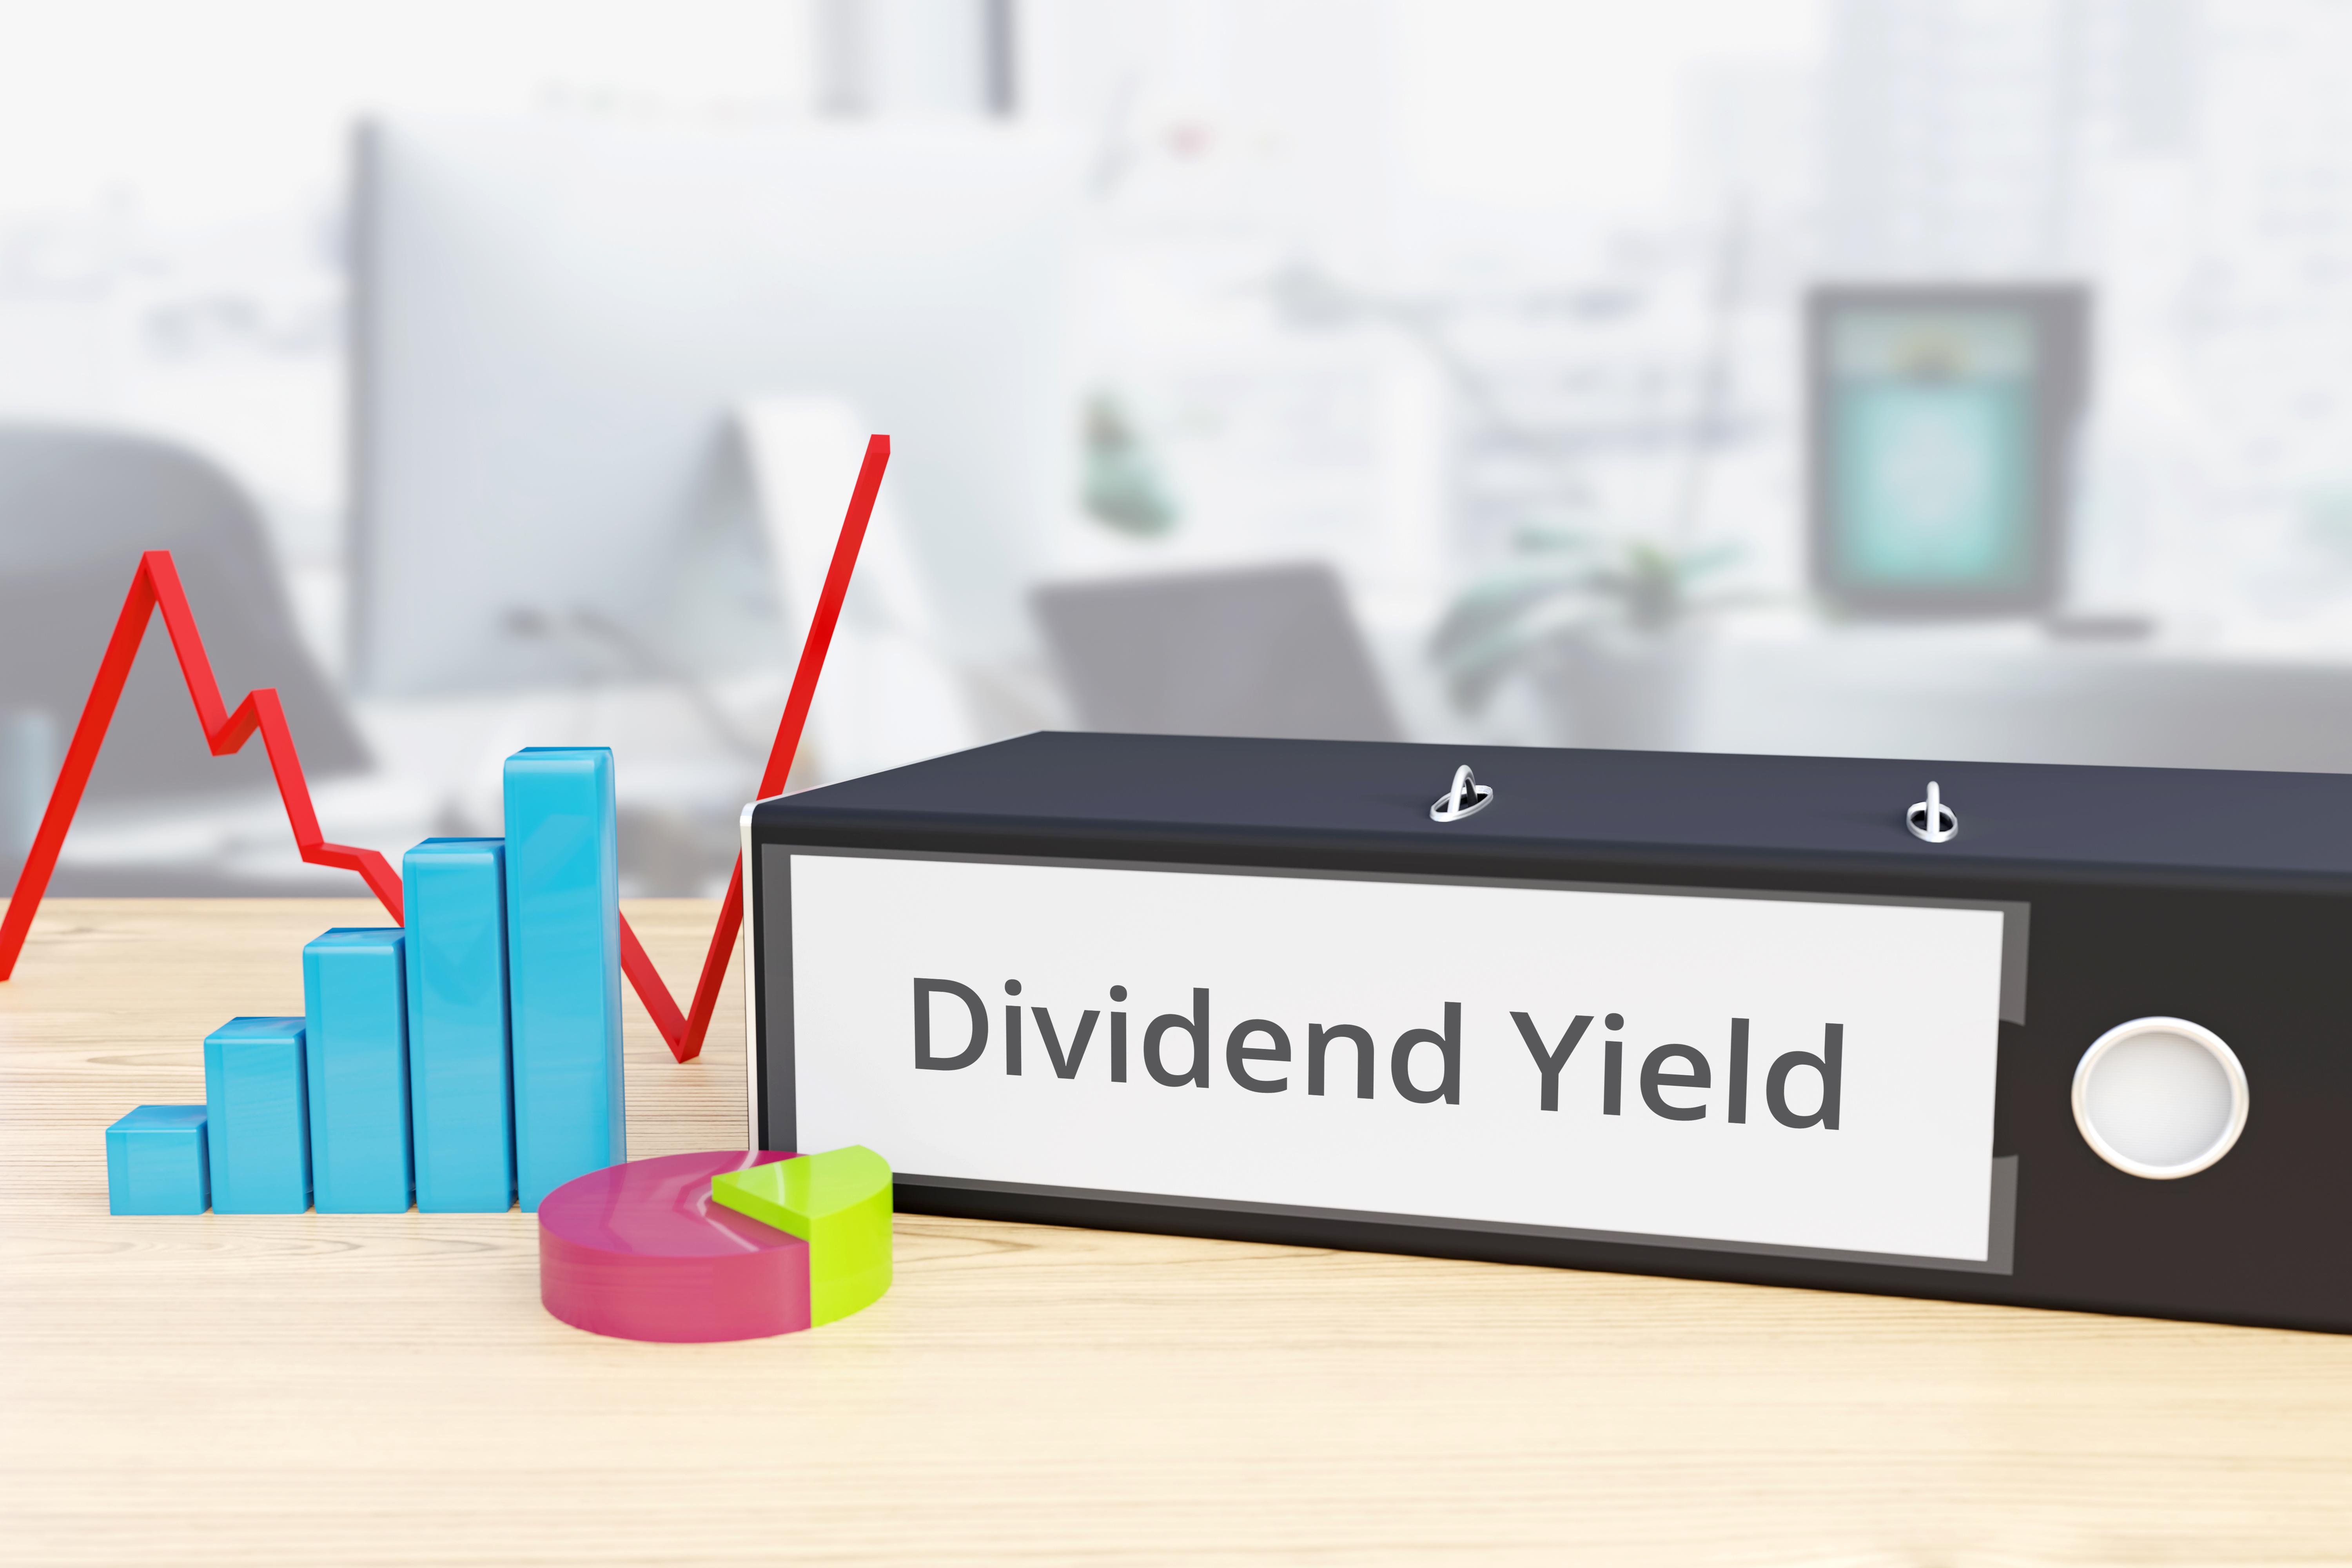 How ExxonMobil’s and Chevron’s Dividend Yields Compare